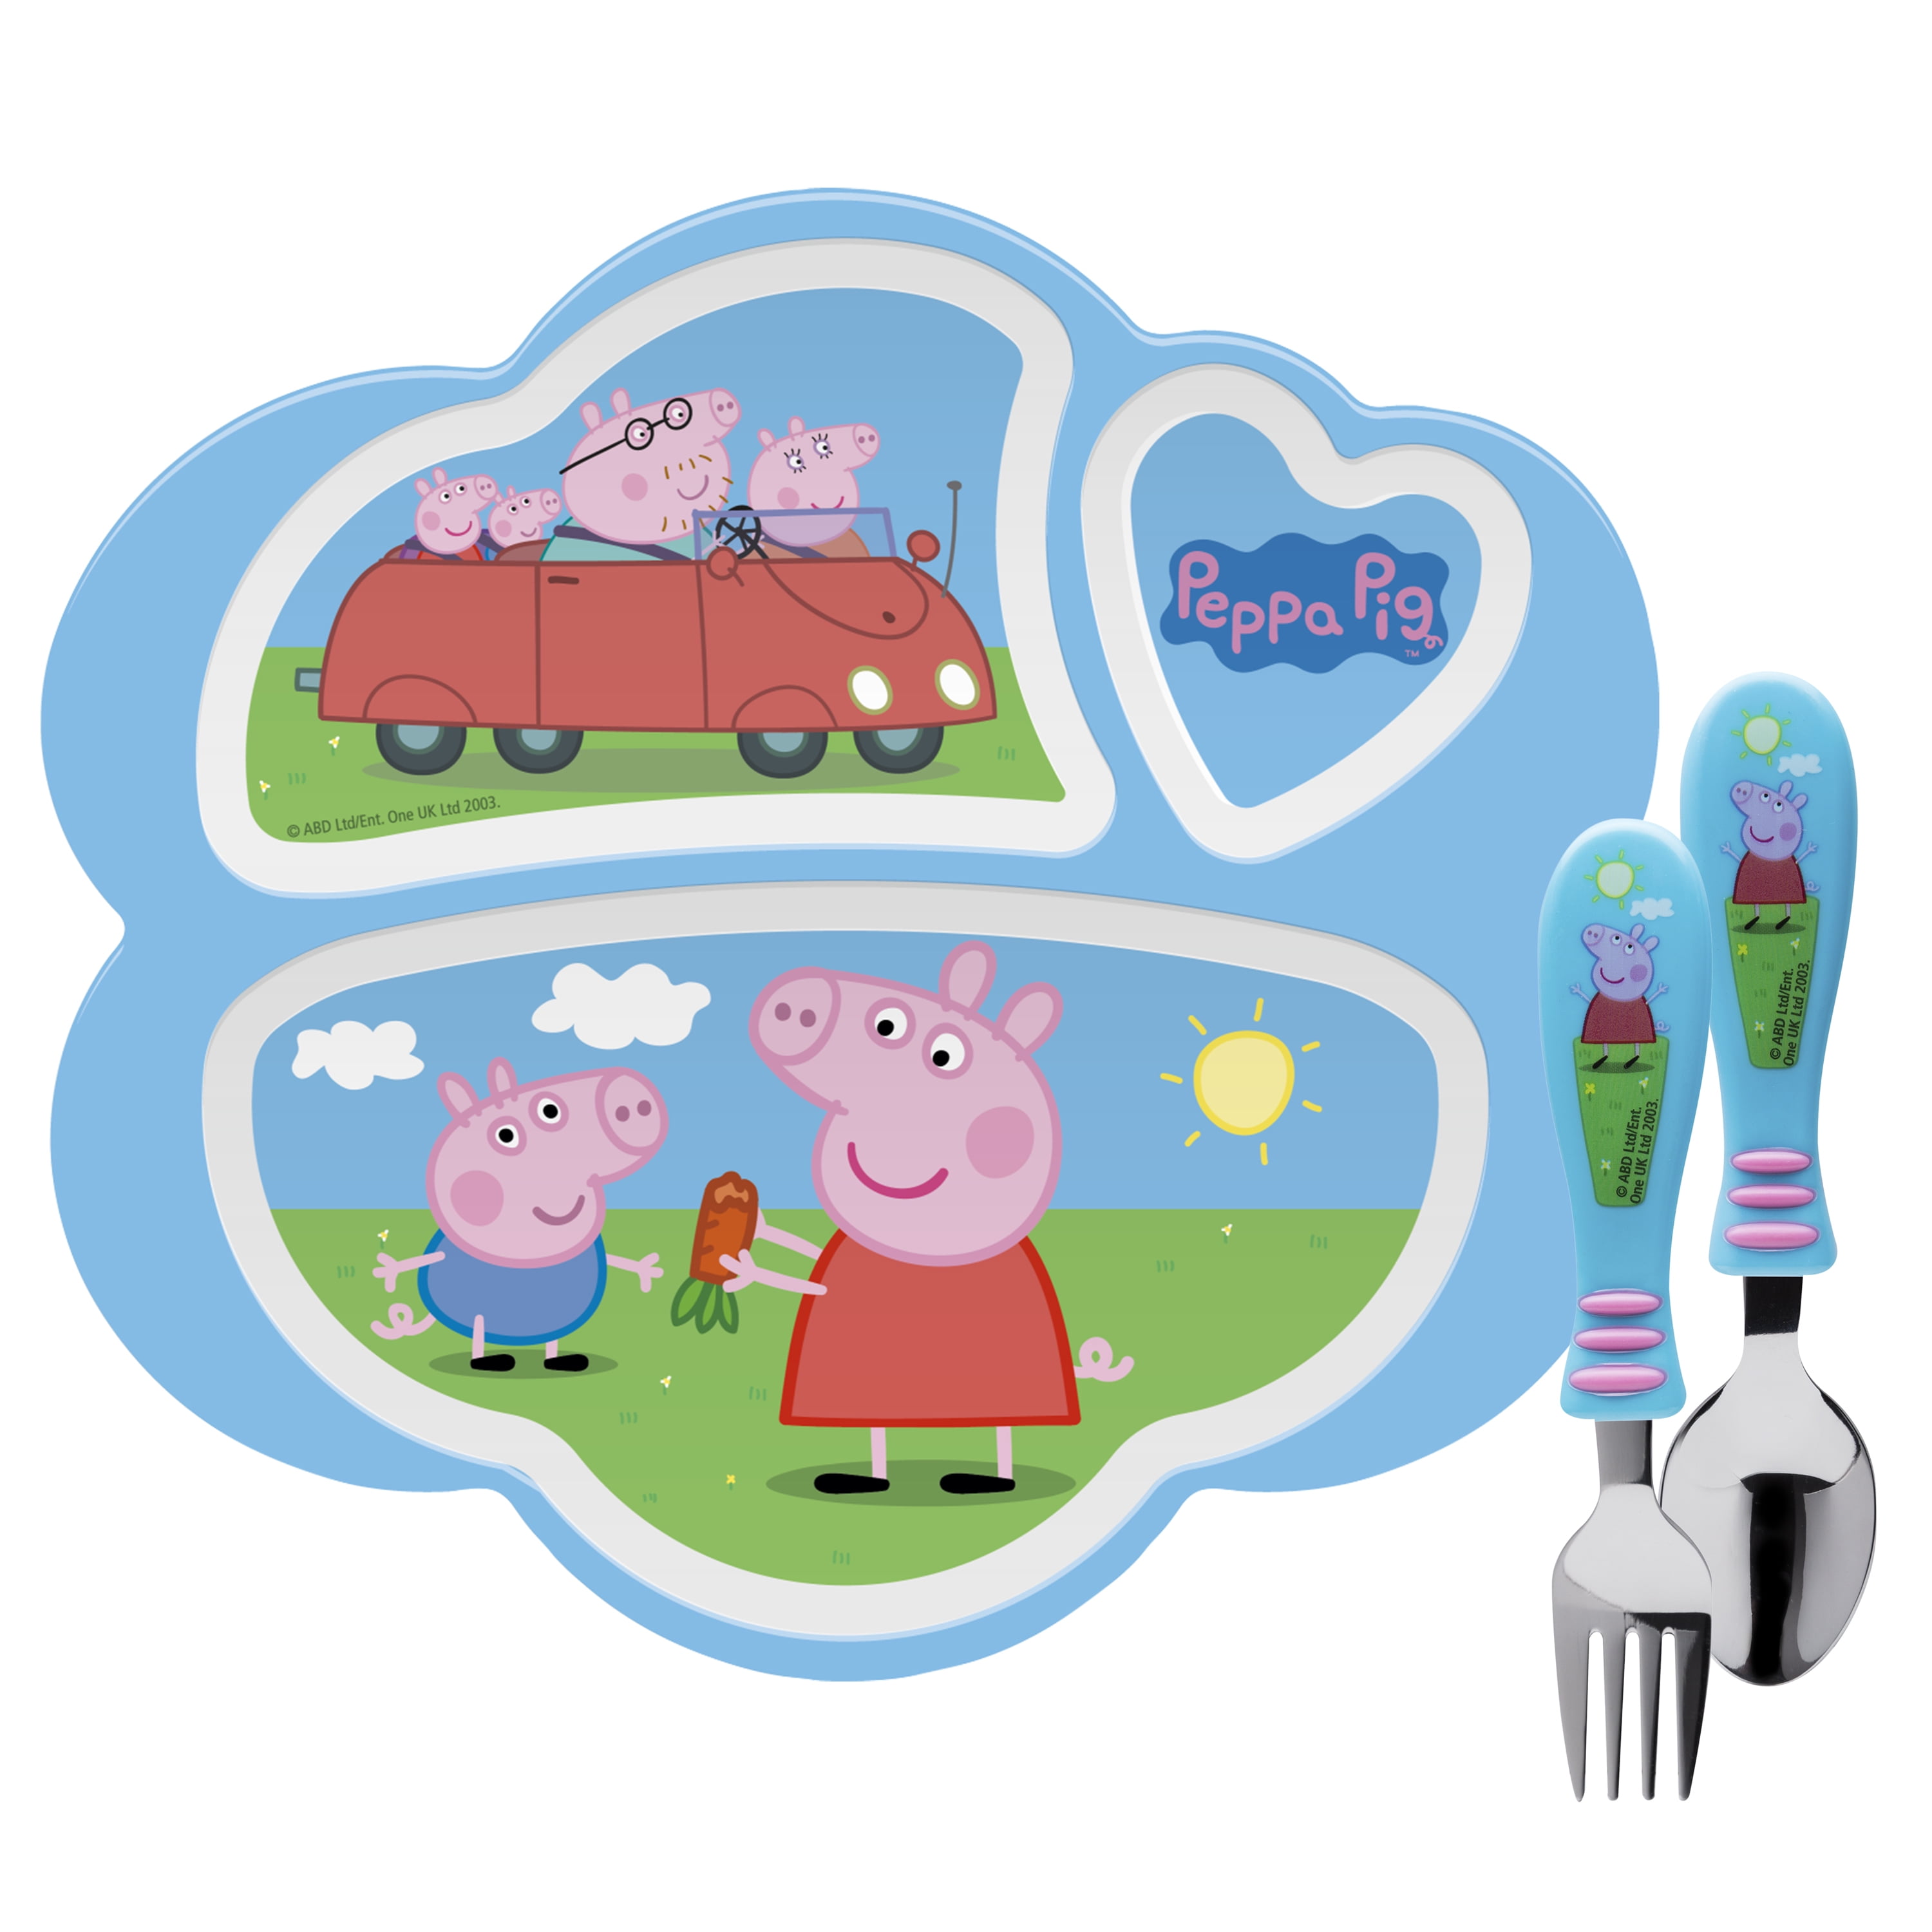 New Peppa Pig 4 Piece Cutlery Set Perfect Gift for Boy or Girl Free Delivery 